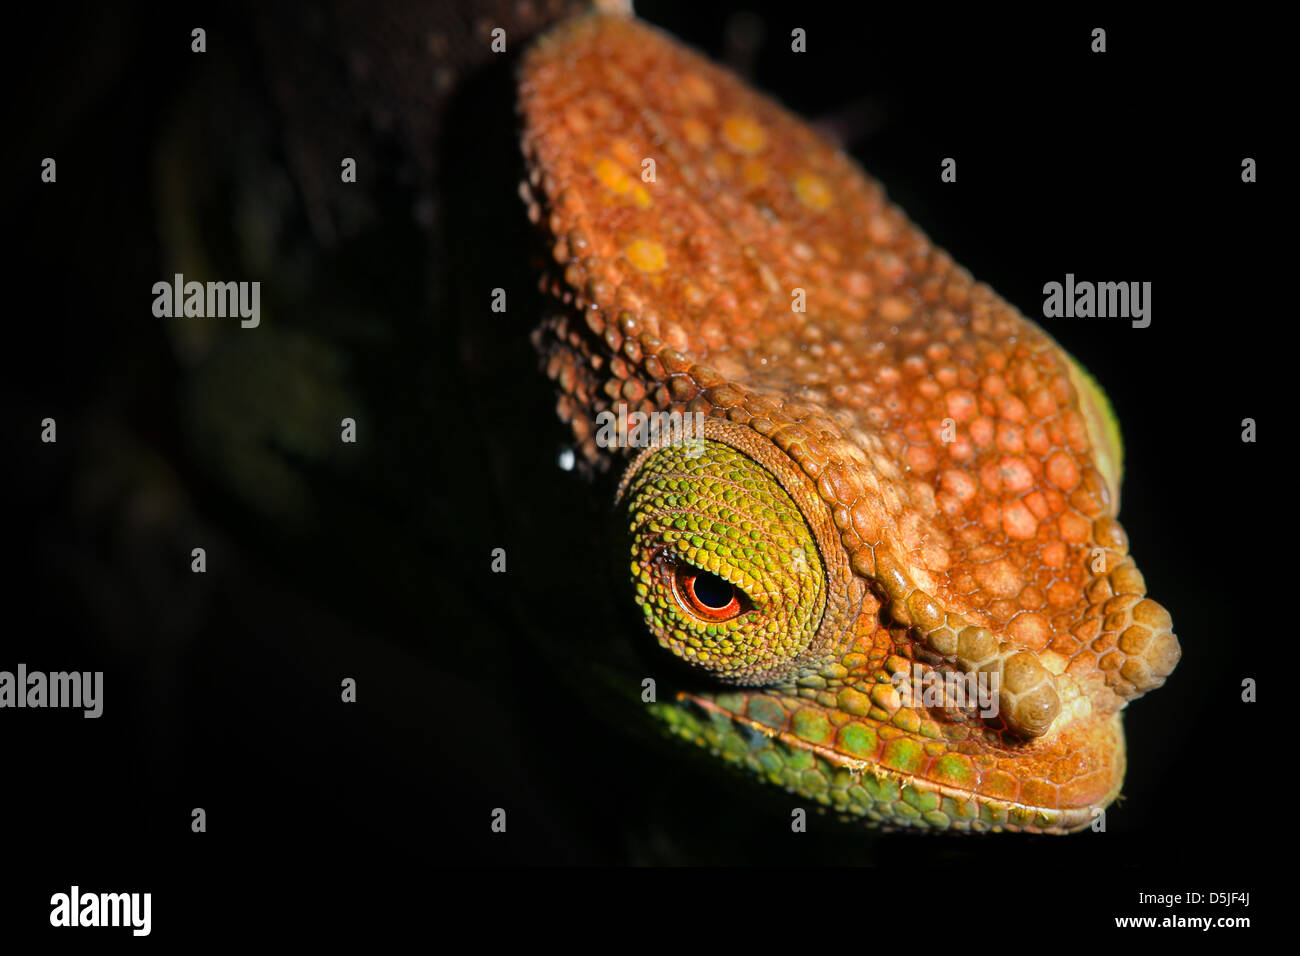 ENDANGERED O'Shaughnessy's Chameleon (Calumma oshaughnessyi) in the Ranomafana Rain Forests of Madagascar. Listed as Vulnerable. Stock Photo